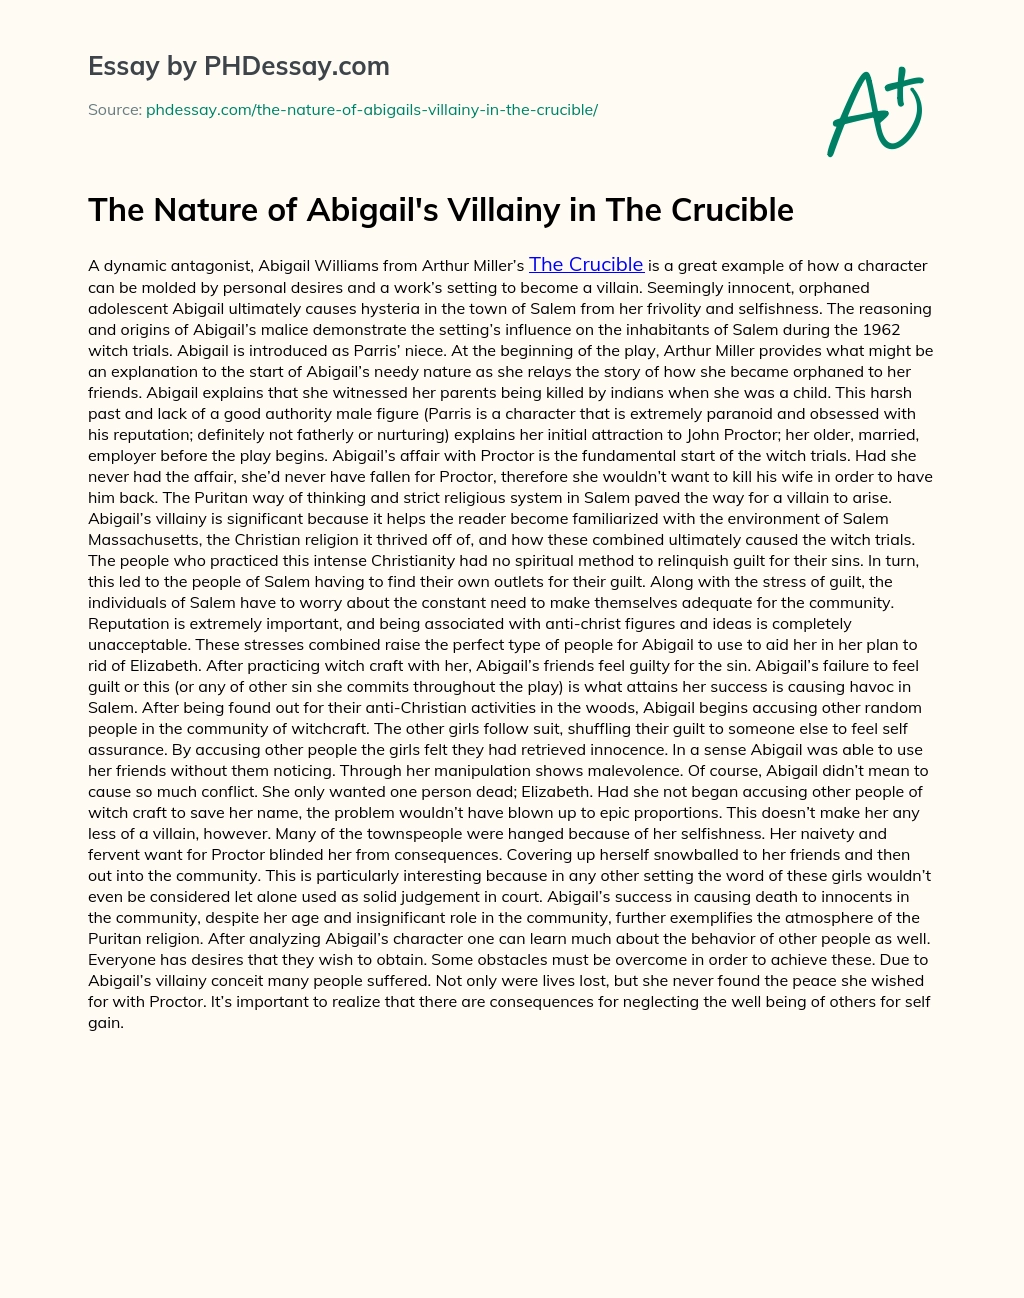 The Nature of Abigail’s Villainy in The Crucible essay